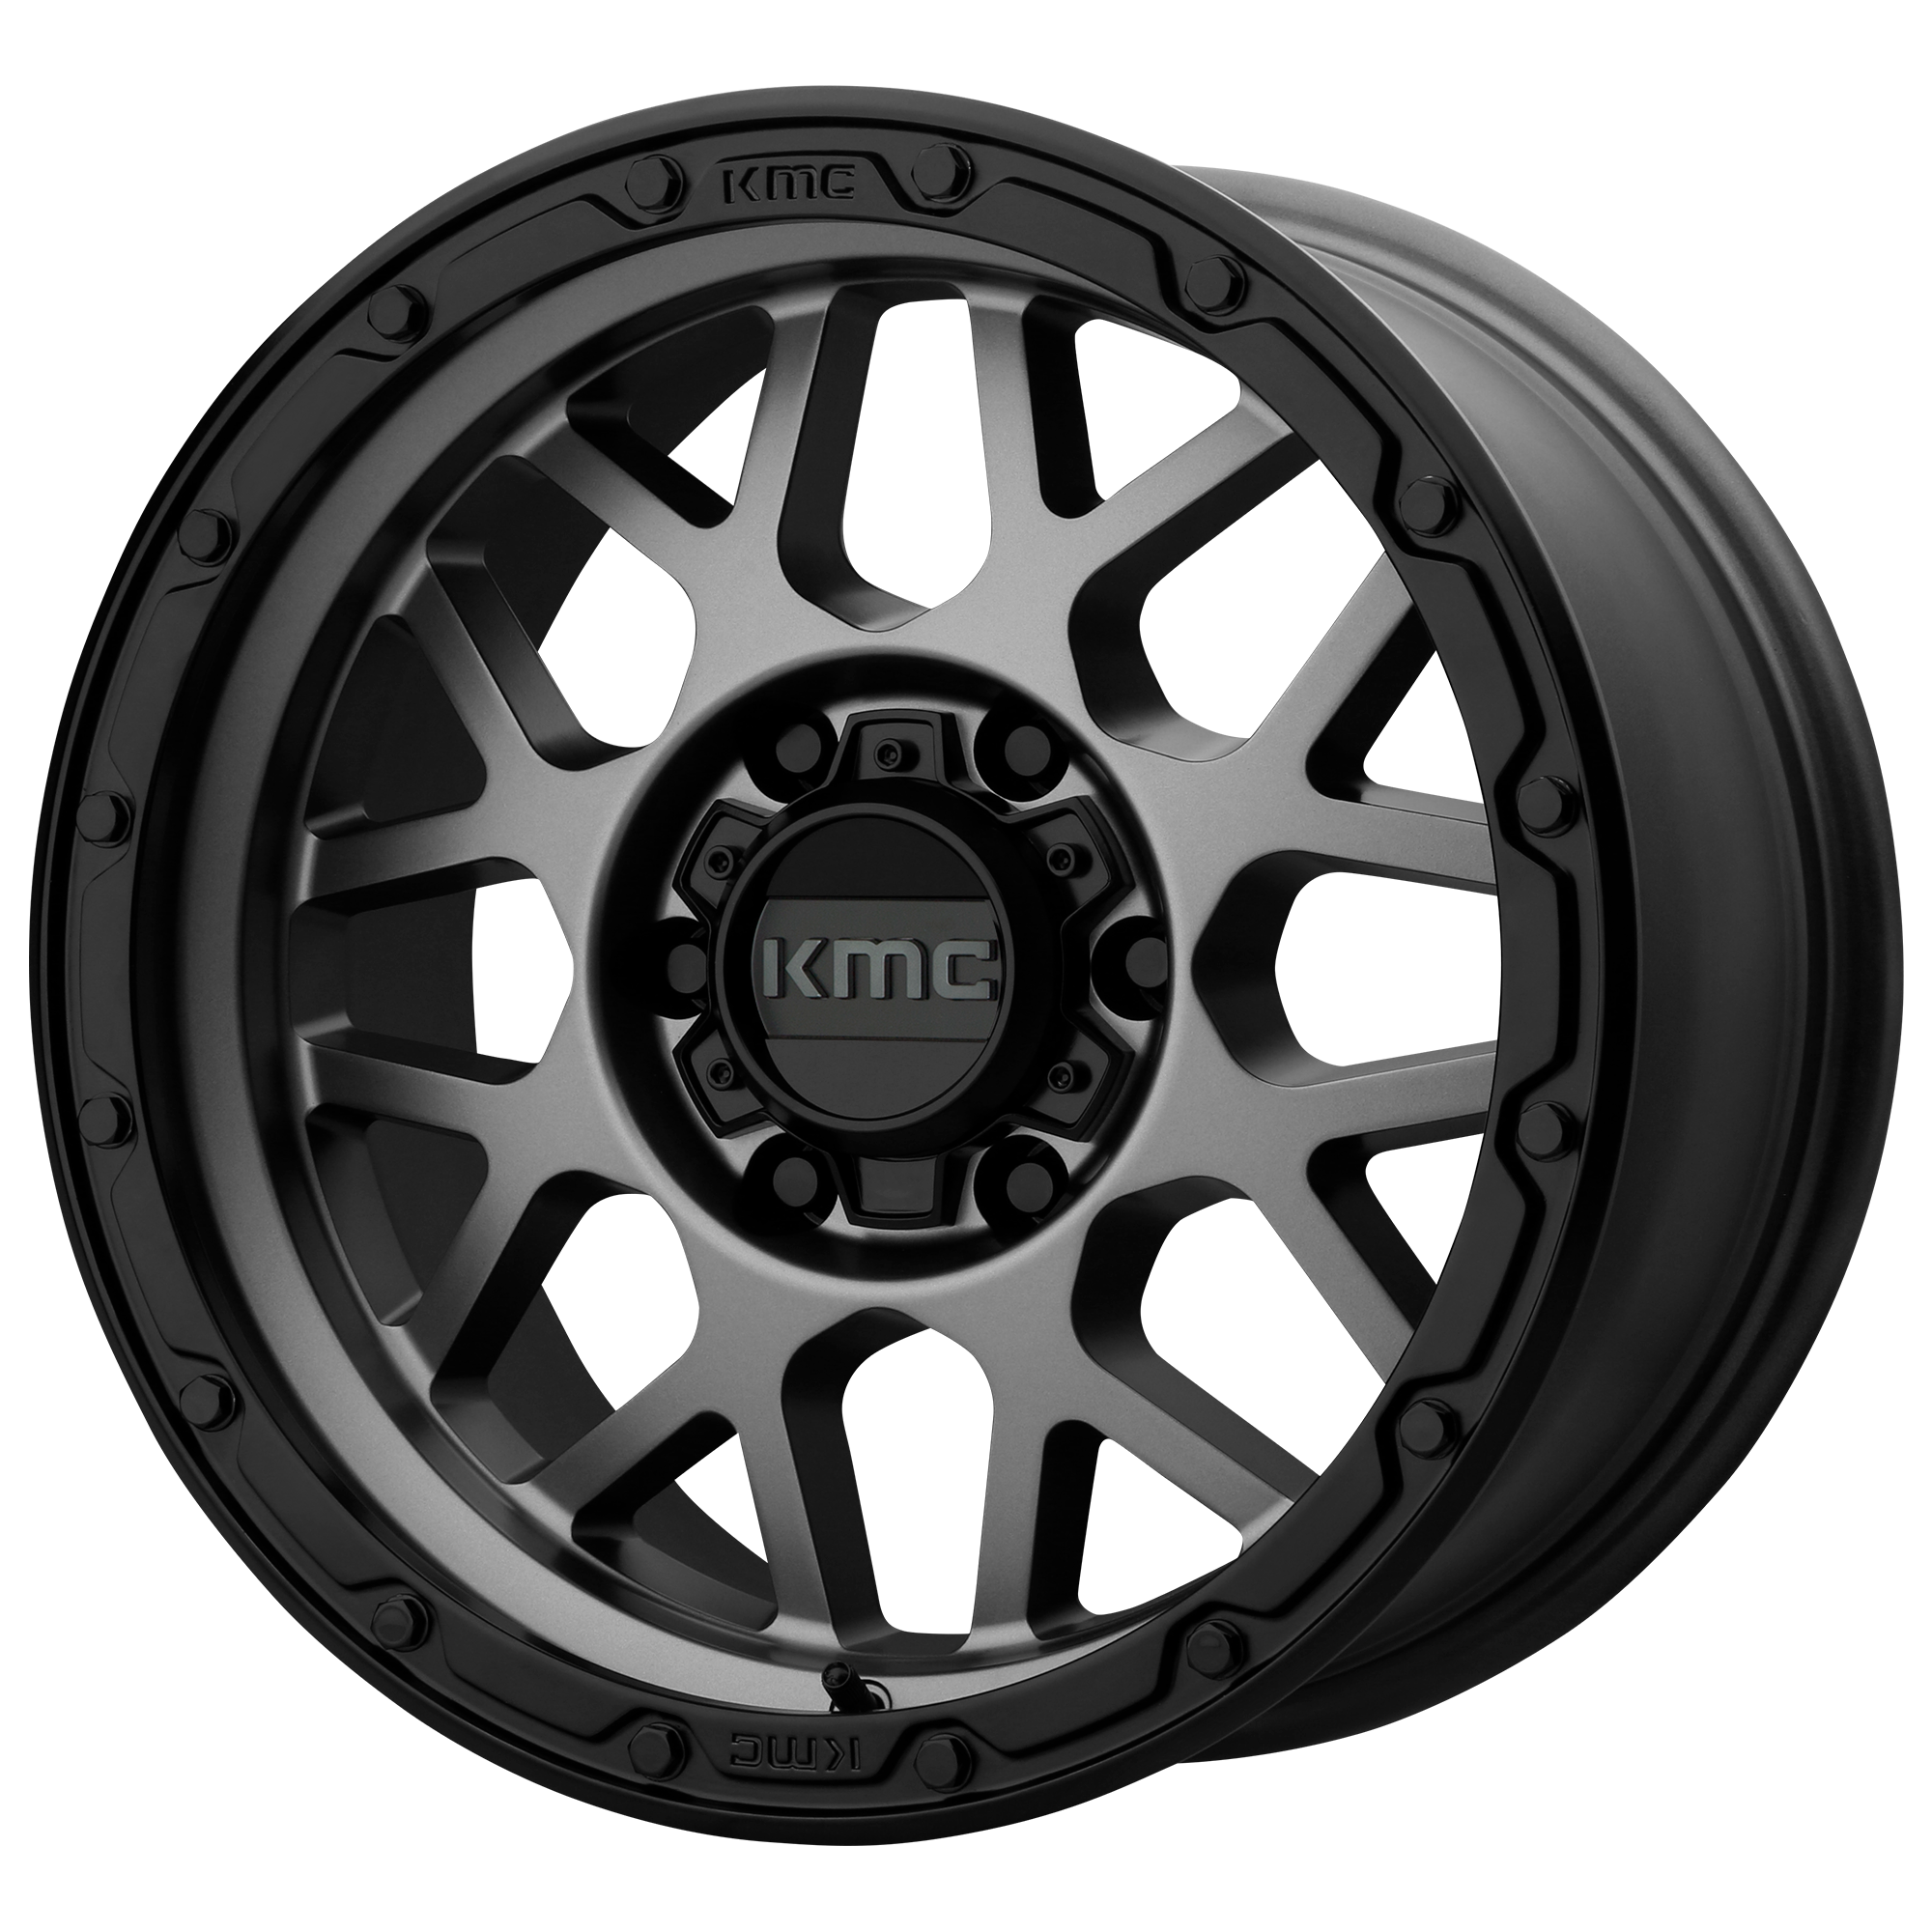 GRENADE OFF-ROAD 20x9 6x135.00 MATTE GRAY W/ MATTE BLACK LIP (18 mm) - Tires and Engine Performance